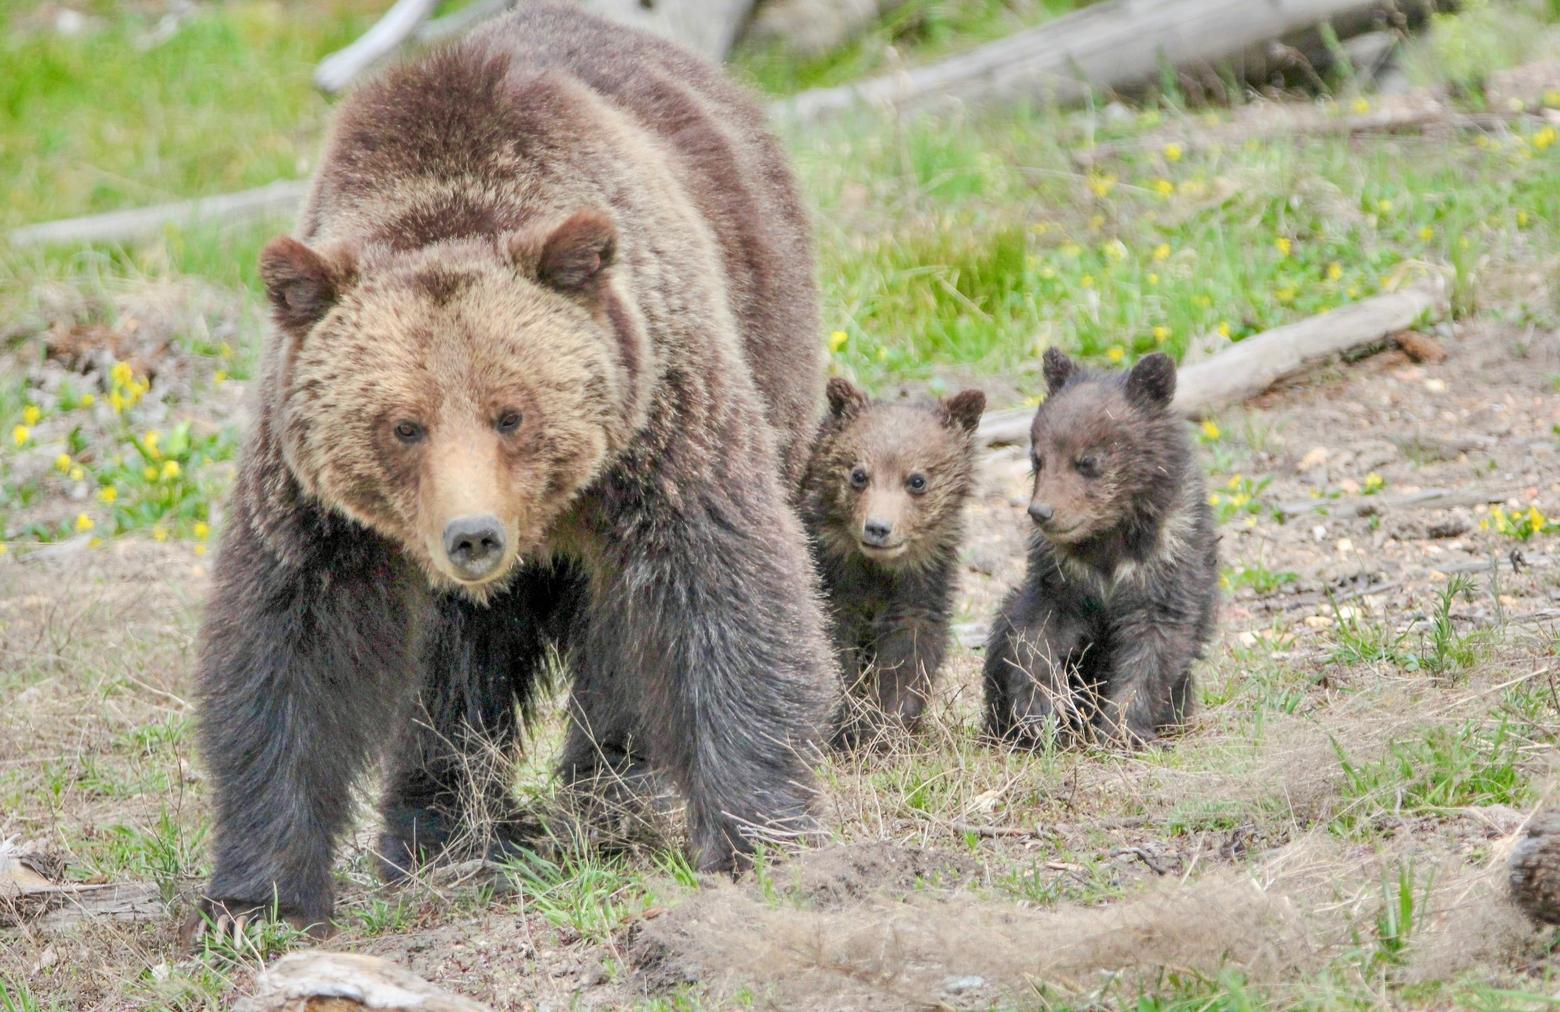 A grizzly bear mother with cubs spotted along the roadside near Roaring Mountain in Yellowstone National Park. Photo courtesy Eric Johnston/NPS